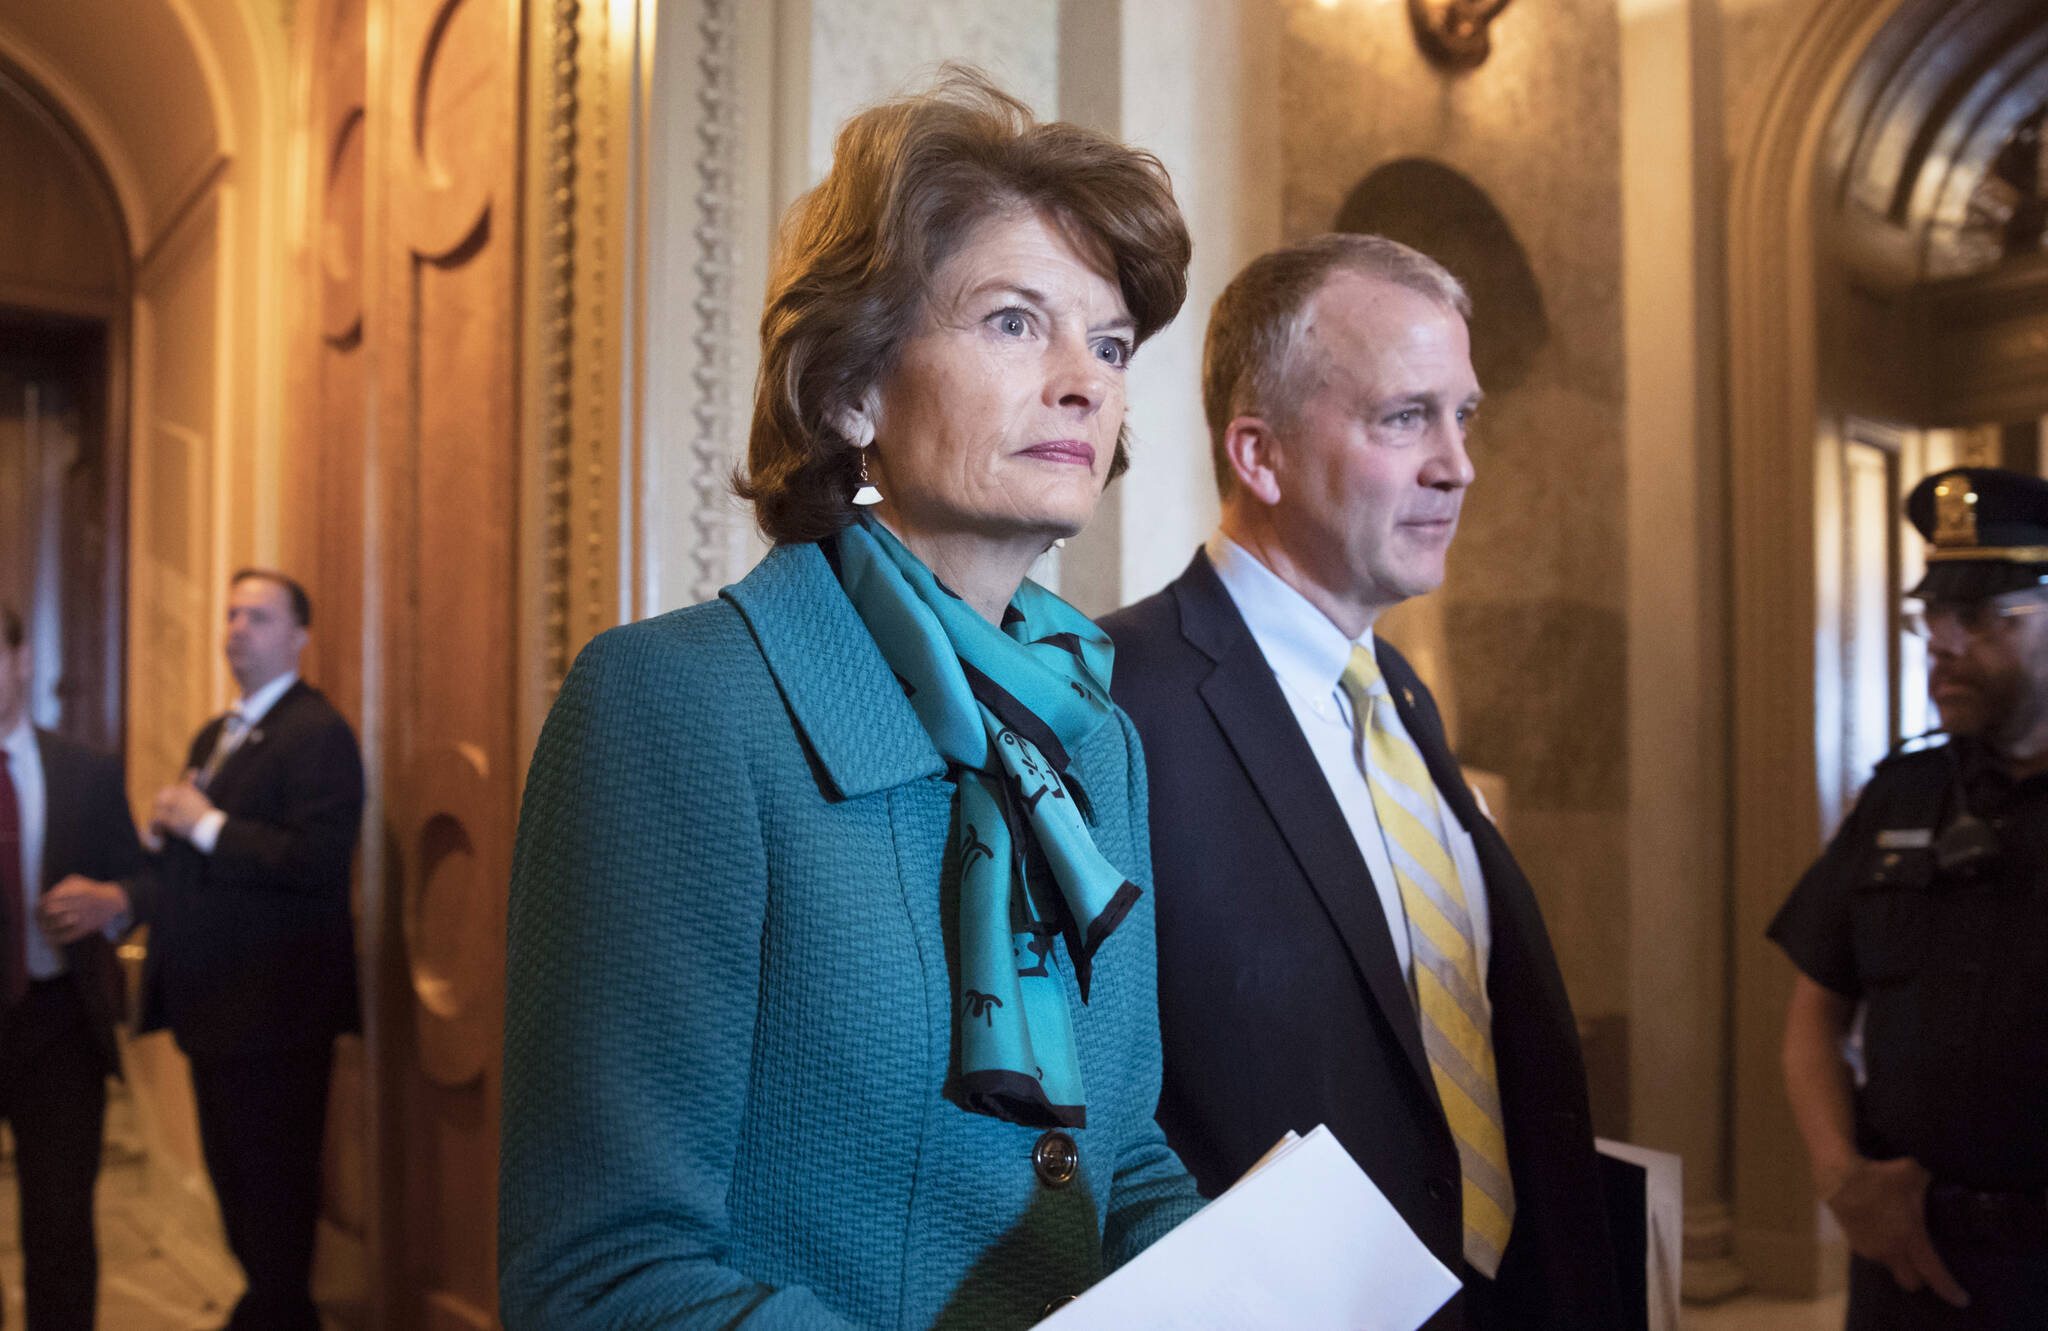 Sen. Lisa Murkowski, R-Alaska, and Sen. Dan Sullivan, R-Alaska, leave the chamber after a vote on Capitol Hill in Washington, early Wednesday, May 10, 2017. Jay Allen Johnson, 65, who faced charges of sending a series of profanity-laced voice messages to the two senators, entered guilty pleas, Monday, Jan. 3, 2022, in federal court in Fairbanks, Alaska, to two counts of threatening to kill a U.S. official. U.S. District Judge Ralph Beistline accepted Johnson’s pleas and set sentencing for April 8. (AP Photo/J. Scott Applewhite, File)